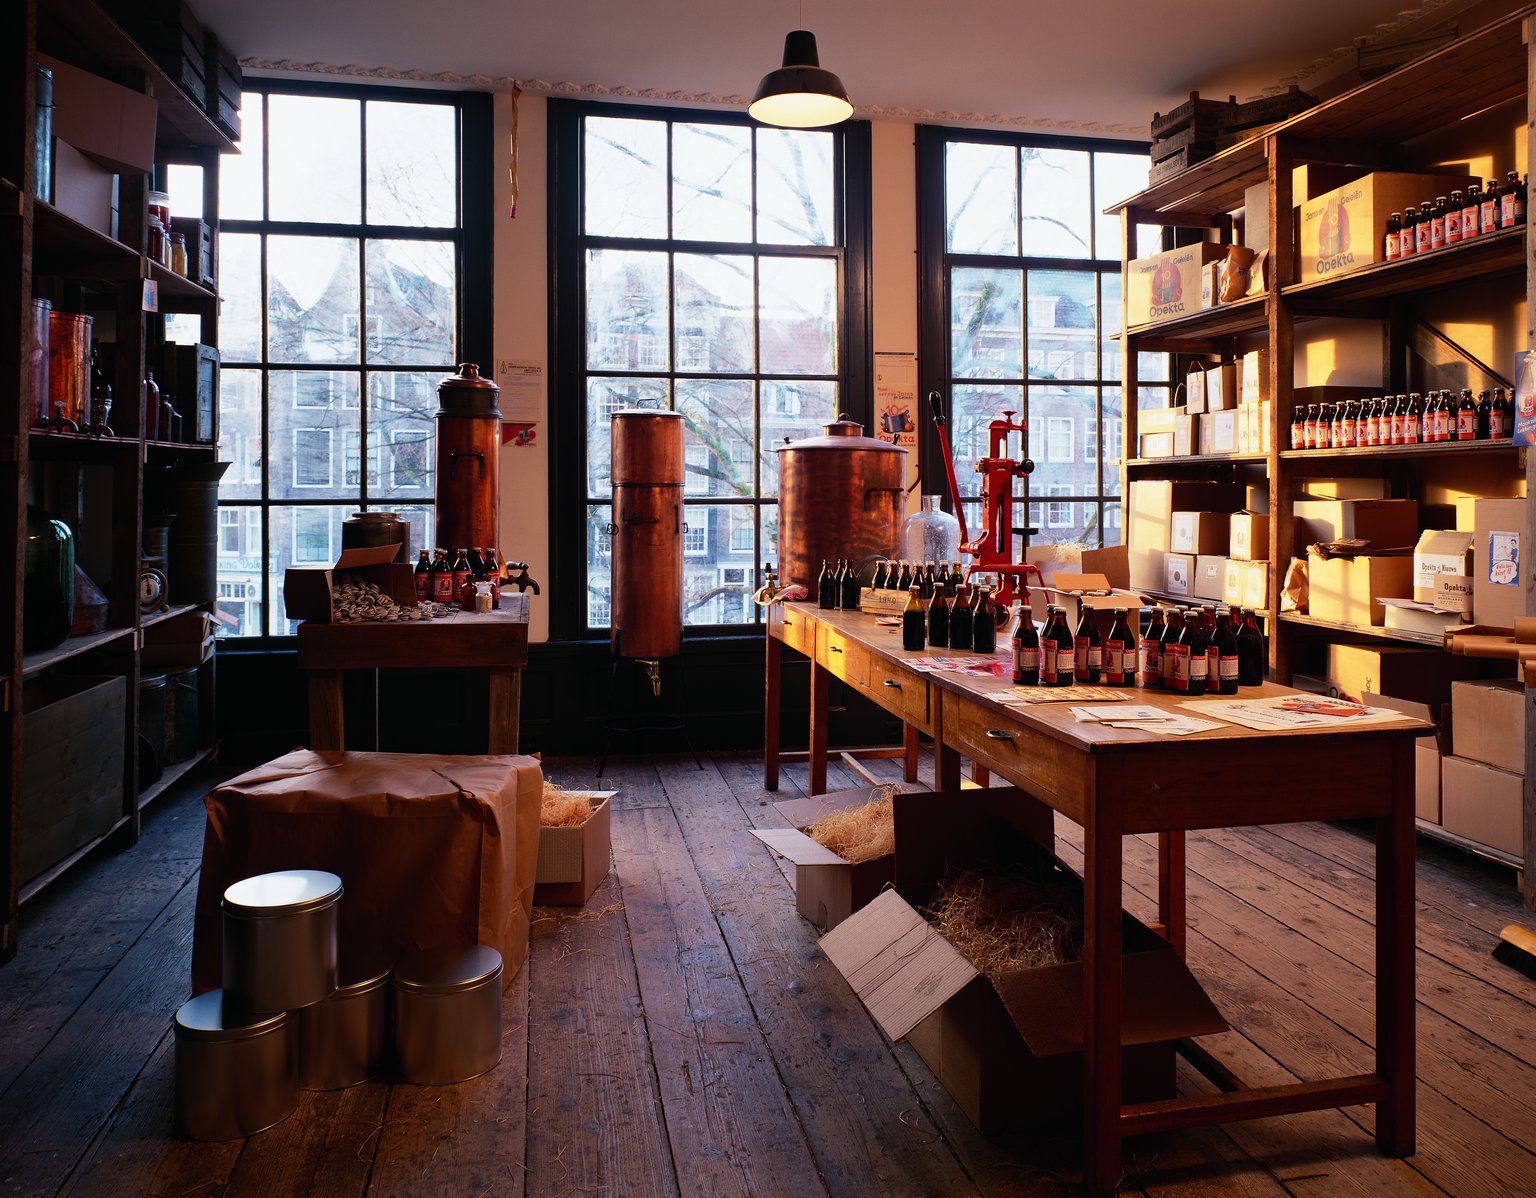 The front storeroom on the second floor of the main house, reconstruction (1999).